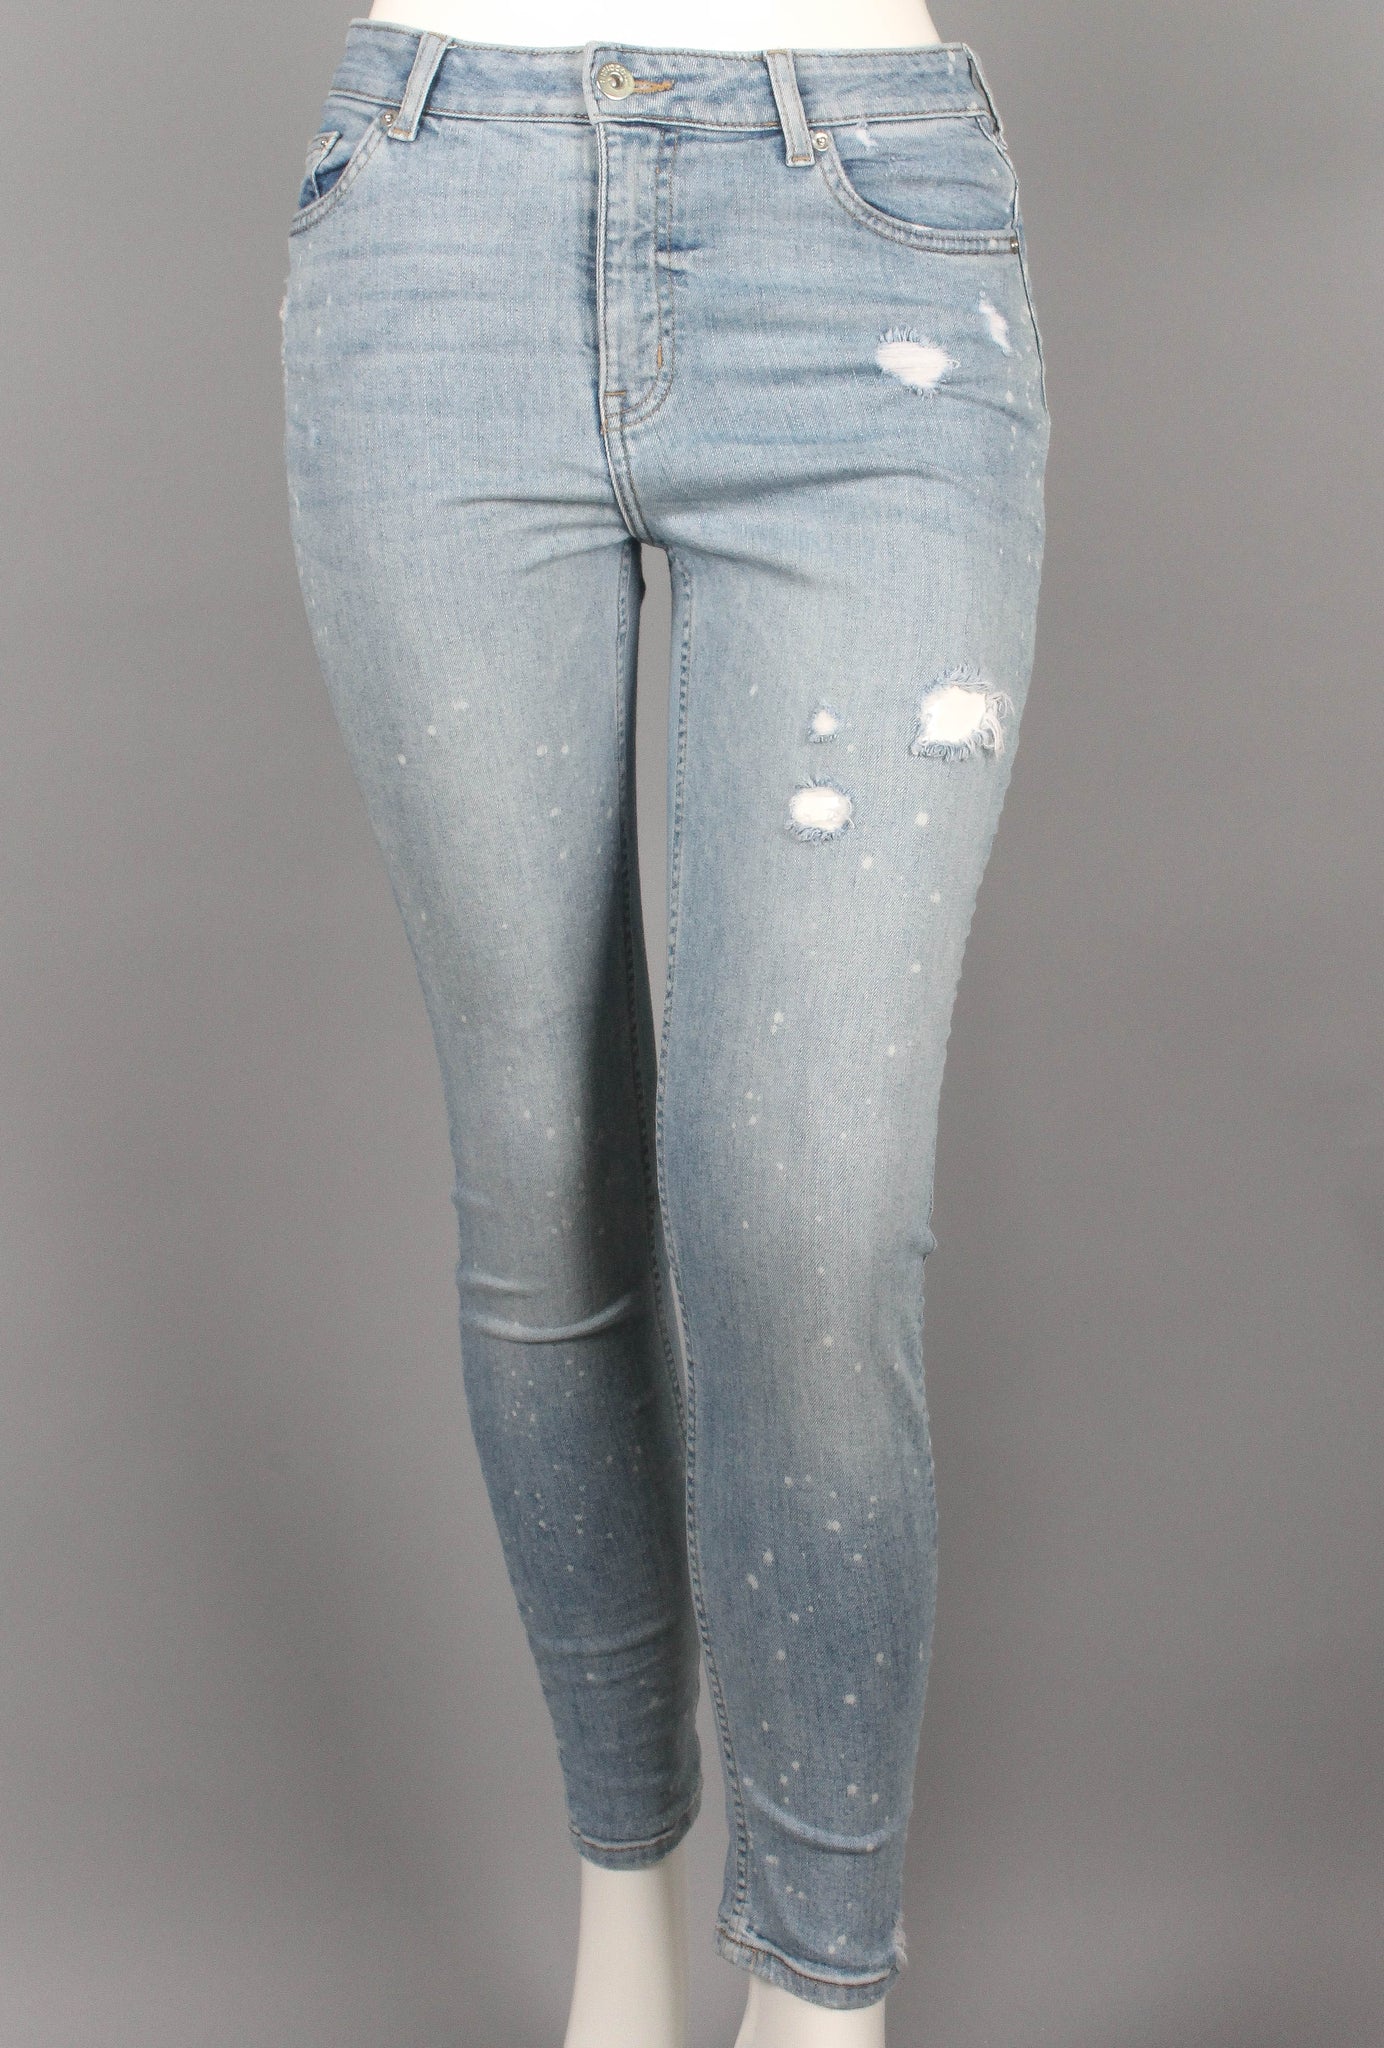 DIVIDED EXCLUSIVE - Skinny Jeans Azules Manchas Blancas